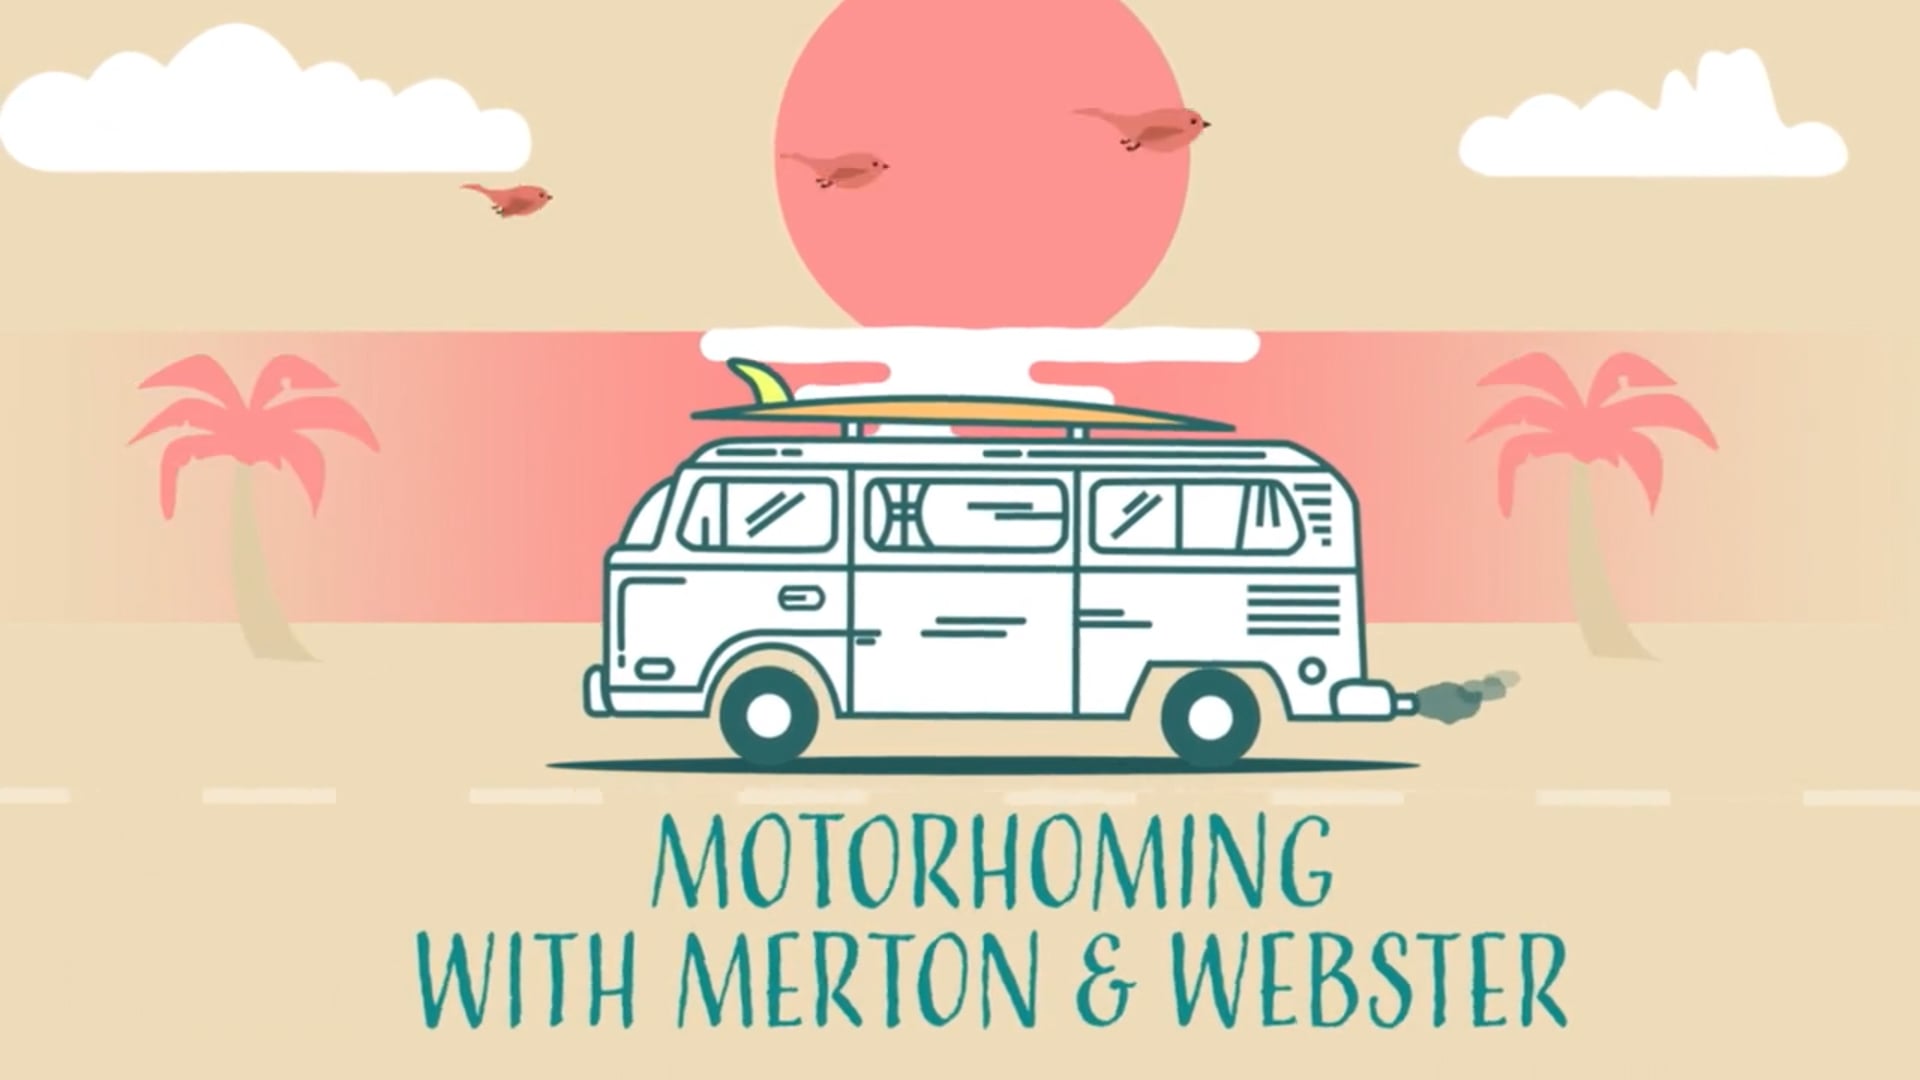 Motorhoming with Merton & Webster - Role Play